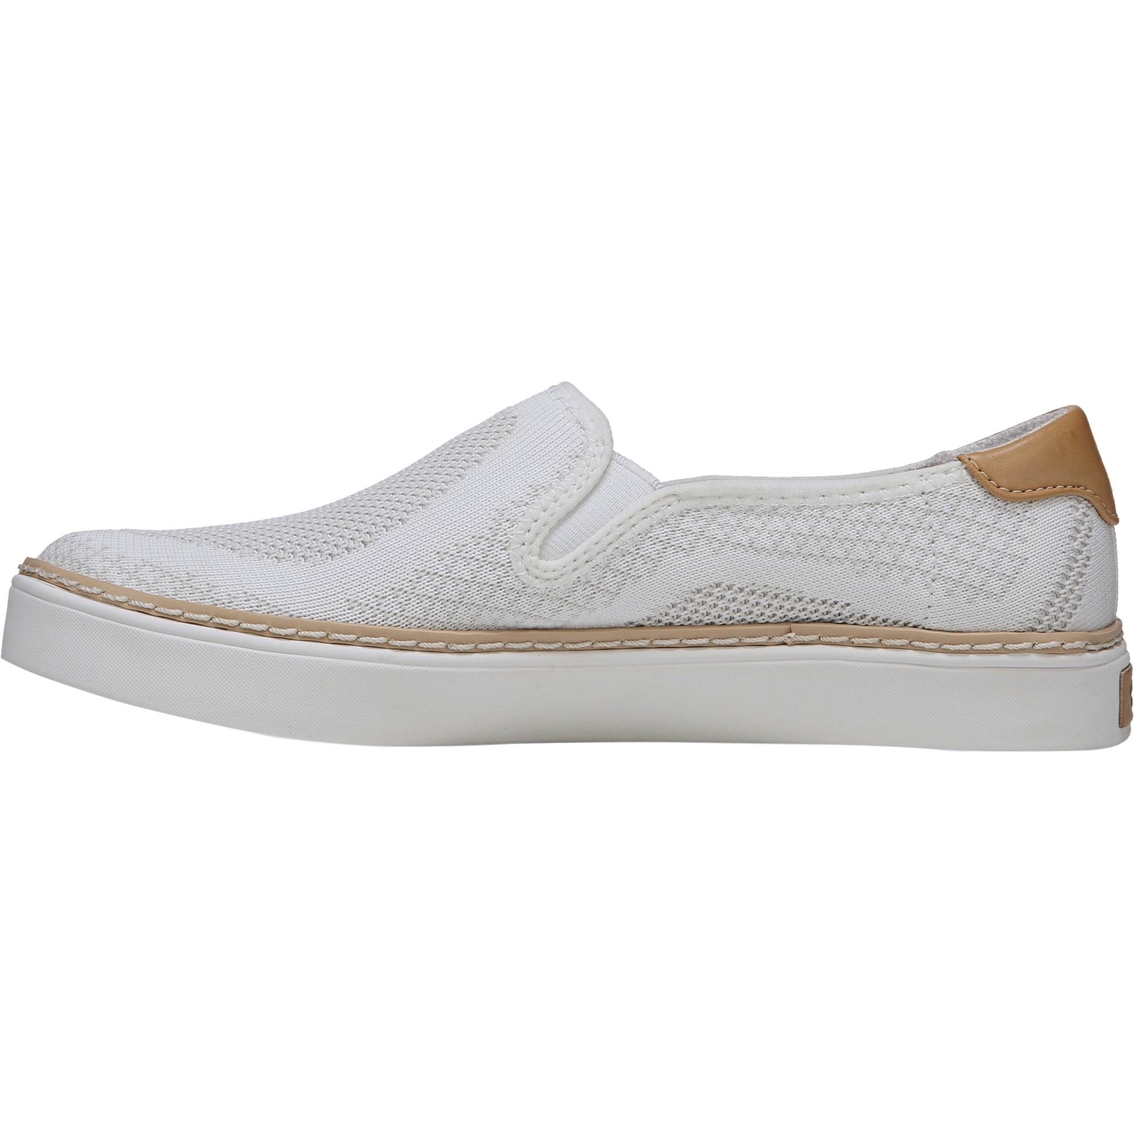 Dr. Scholl's Women's Madi Knit Sneakers - Image 2 of 4